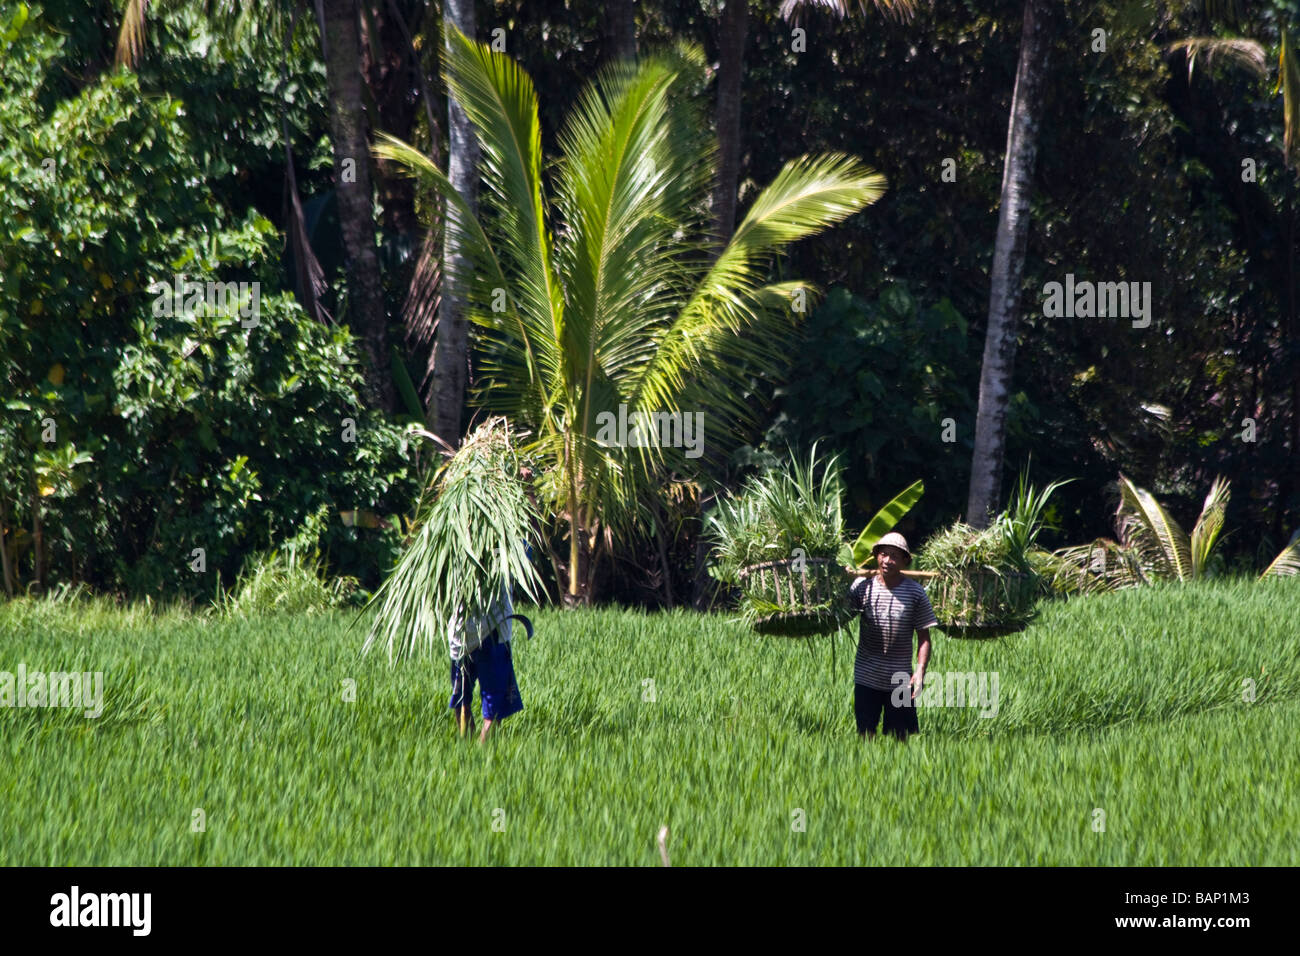 Balines paddy farmer fully laden on rice fields in Ubud Bali Indonesia Stock Photo